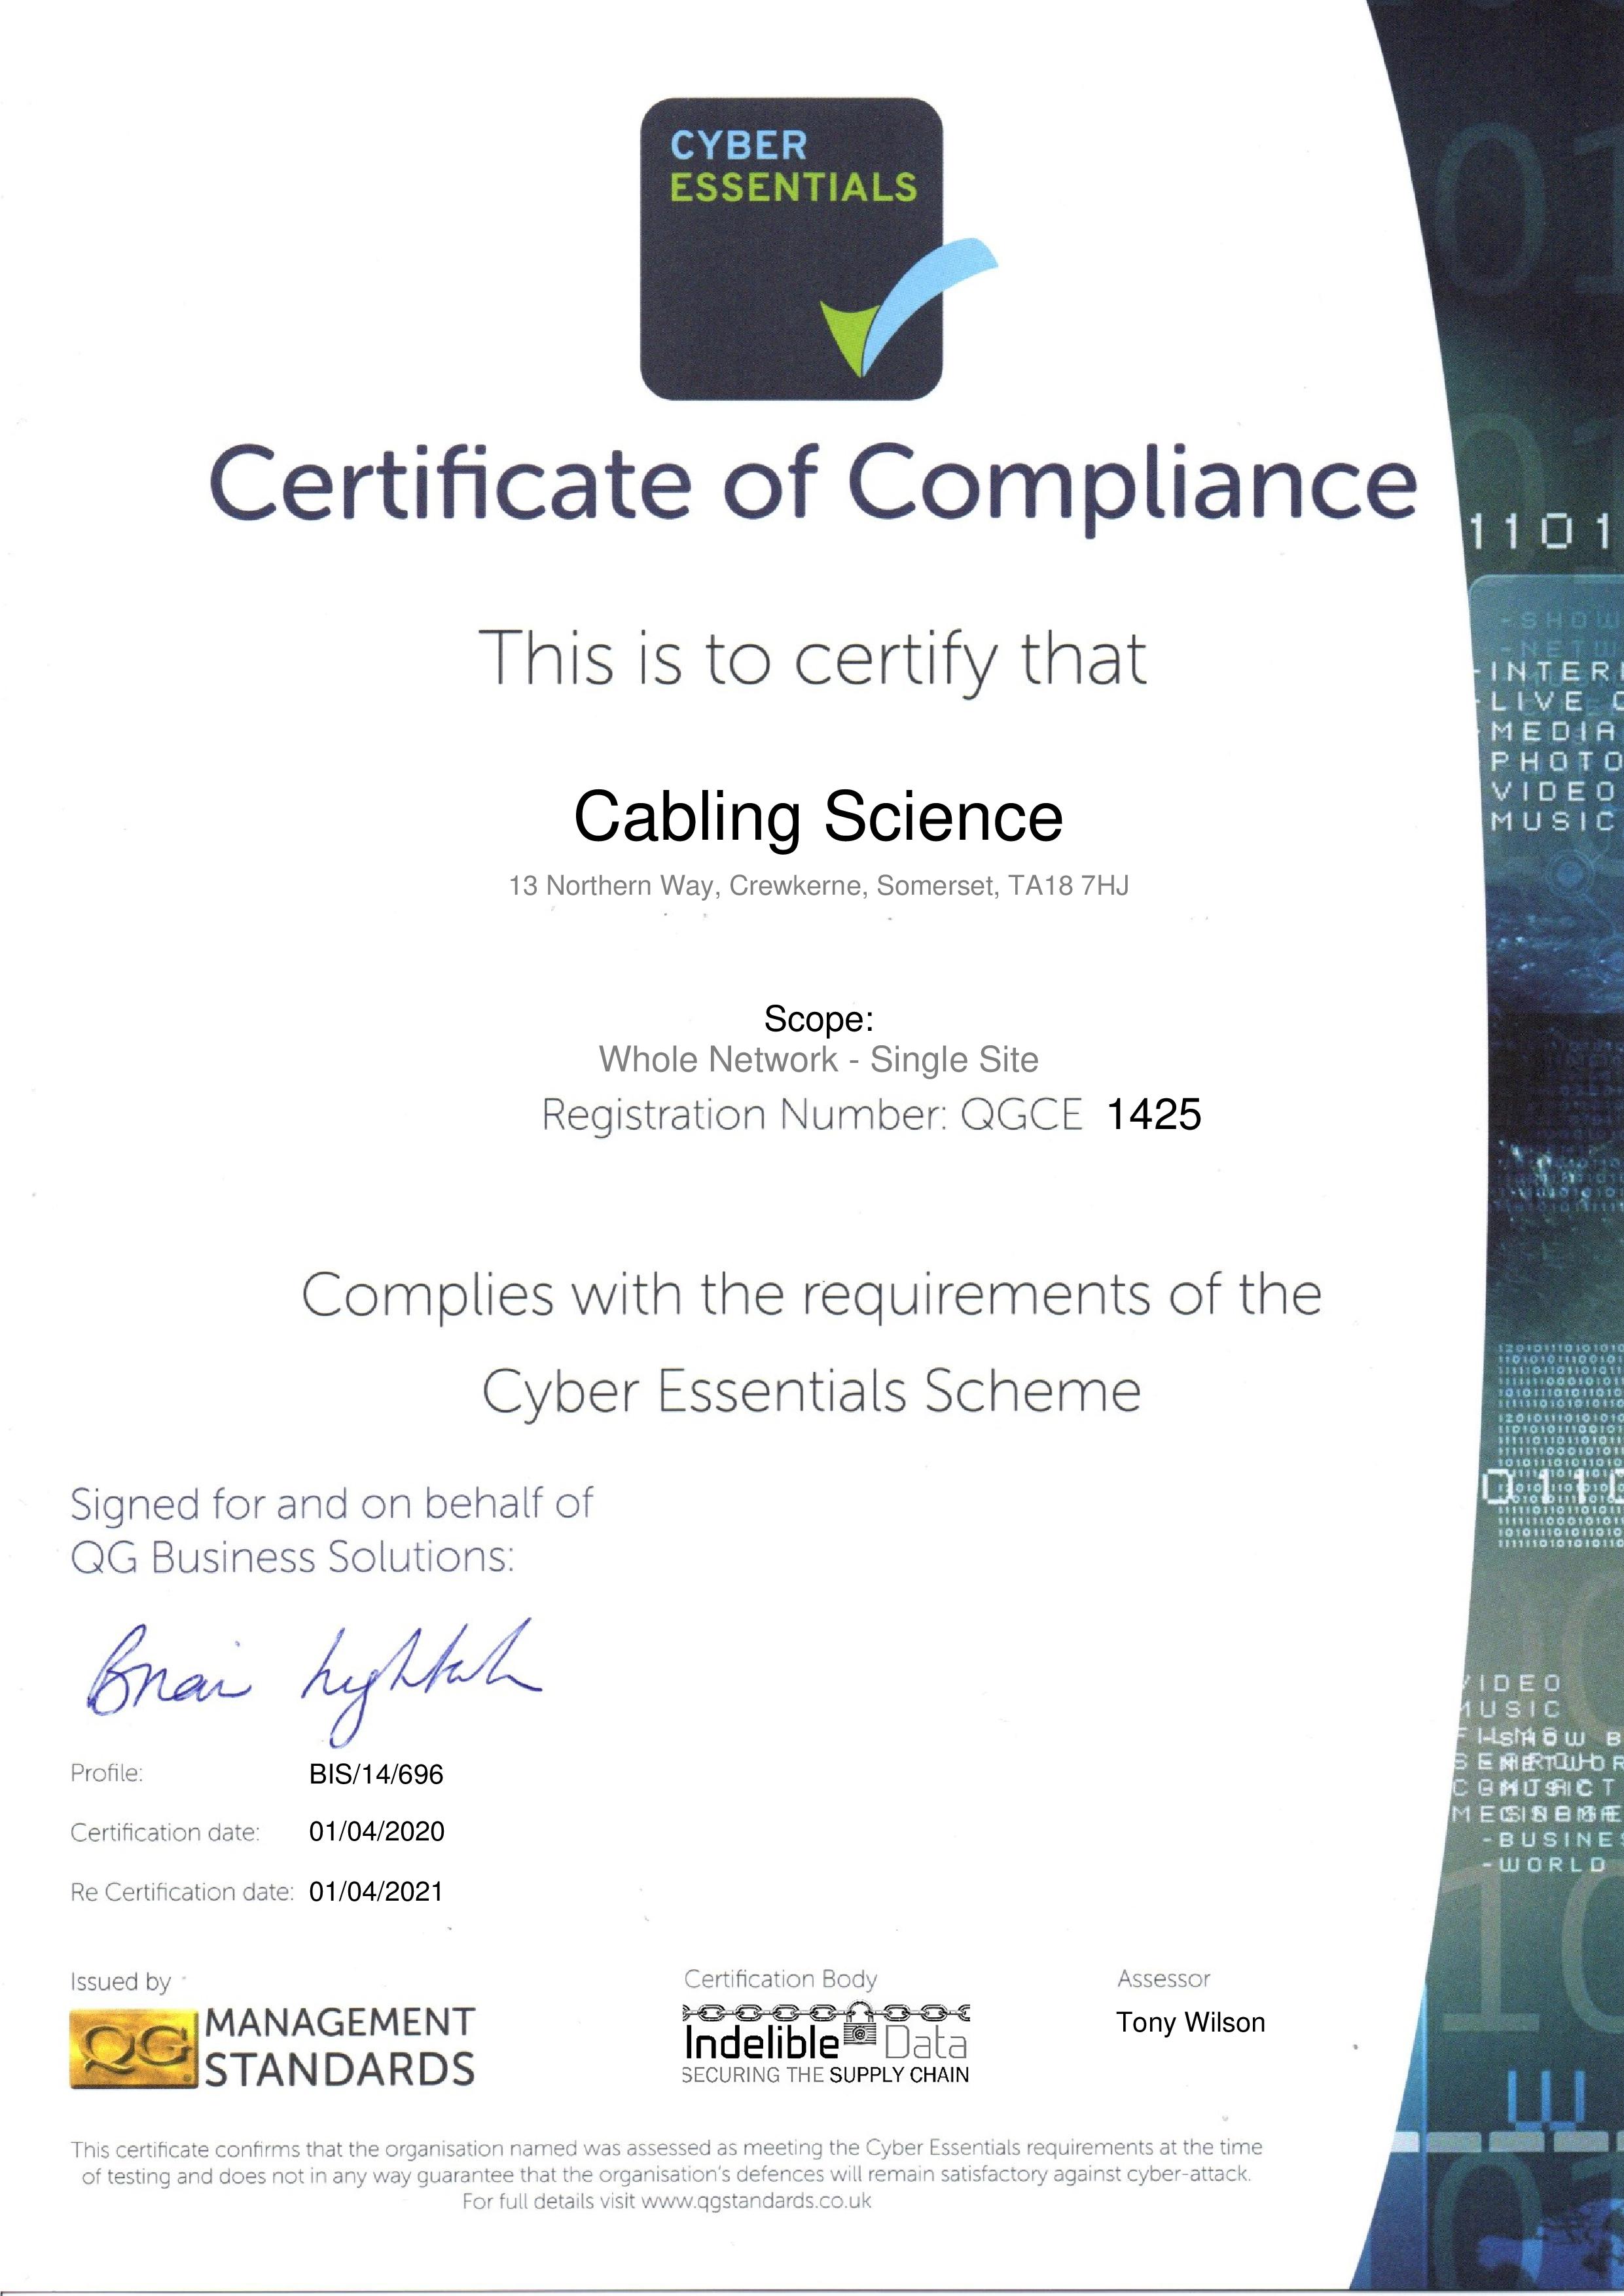 QGCE1425 Cabling Science